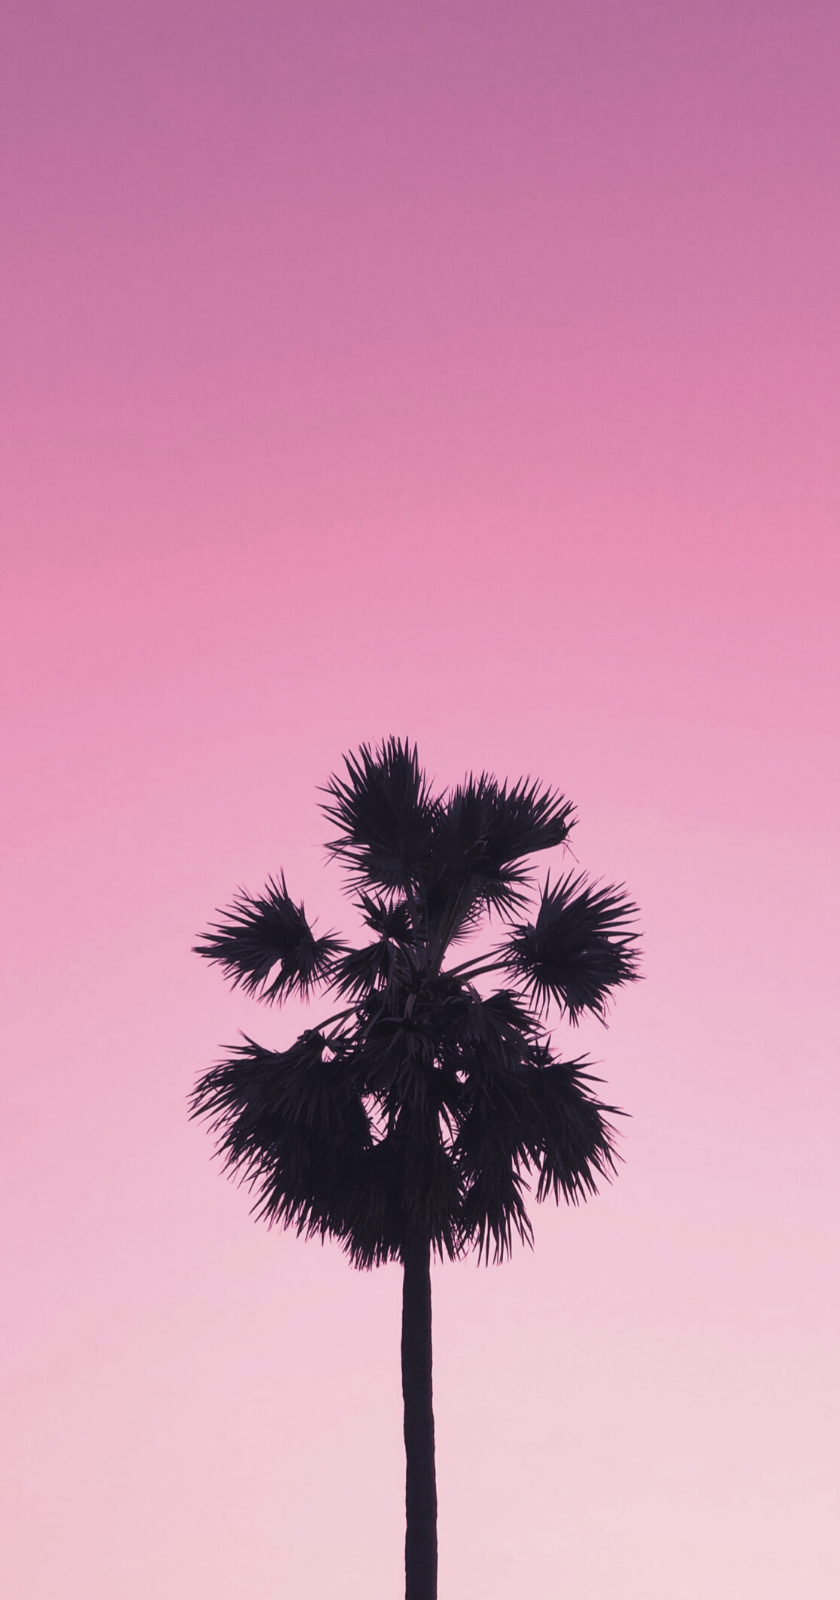 Pink Aesthetics. Wallpaper for iPhone, feel the pink vibes! 2020. iPhone background pink, Galaxy wallpaper, Pink vibes